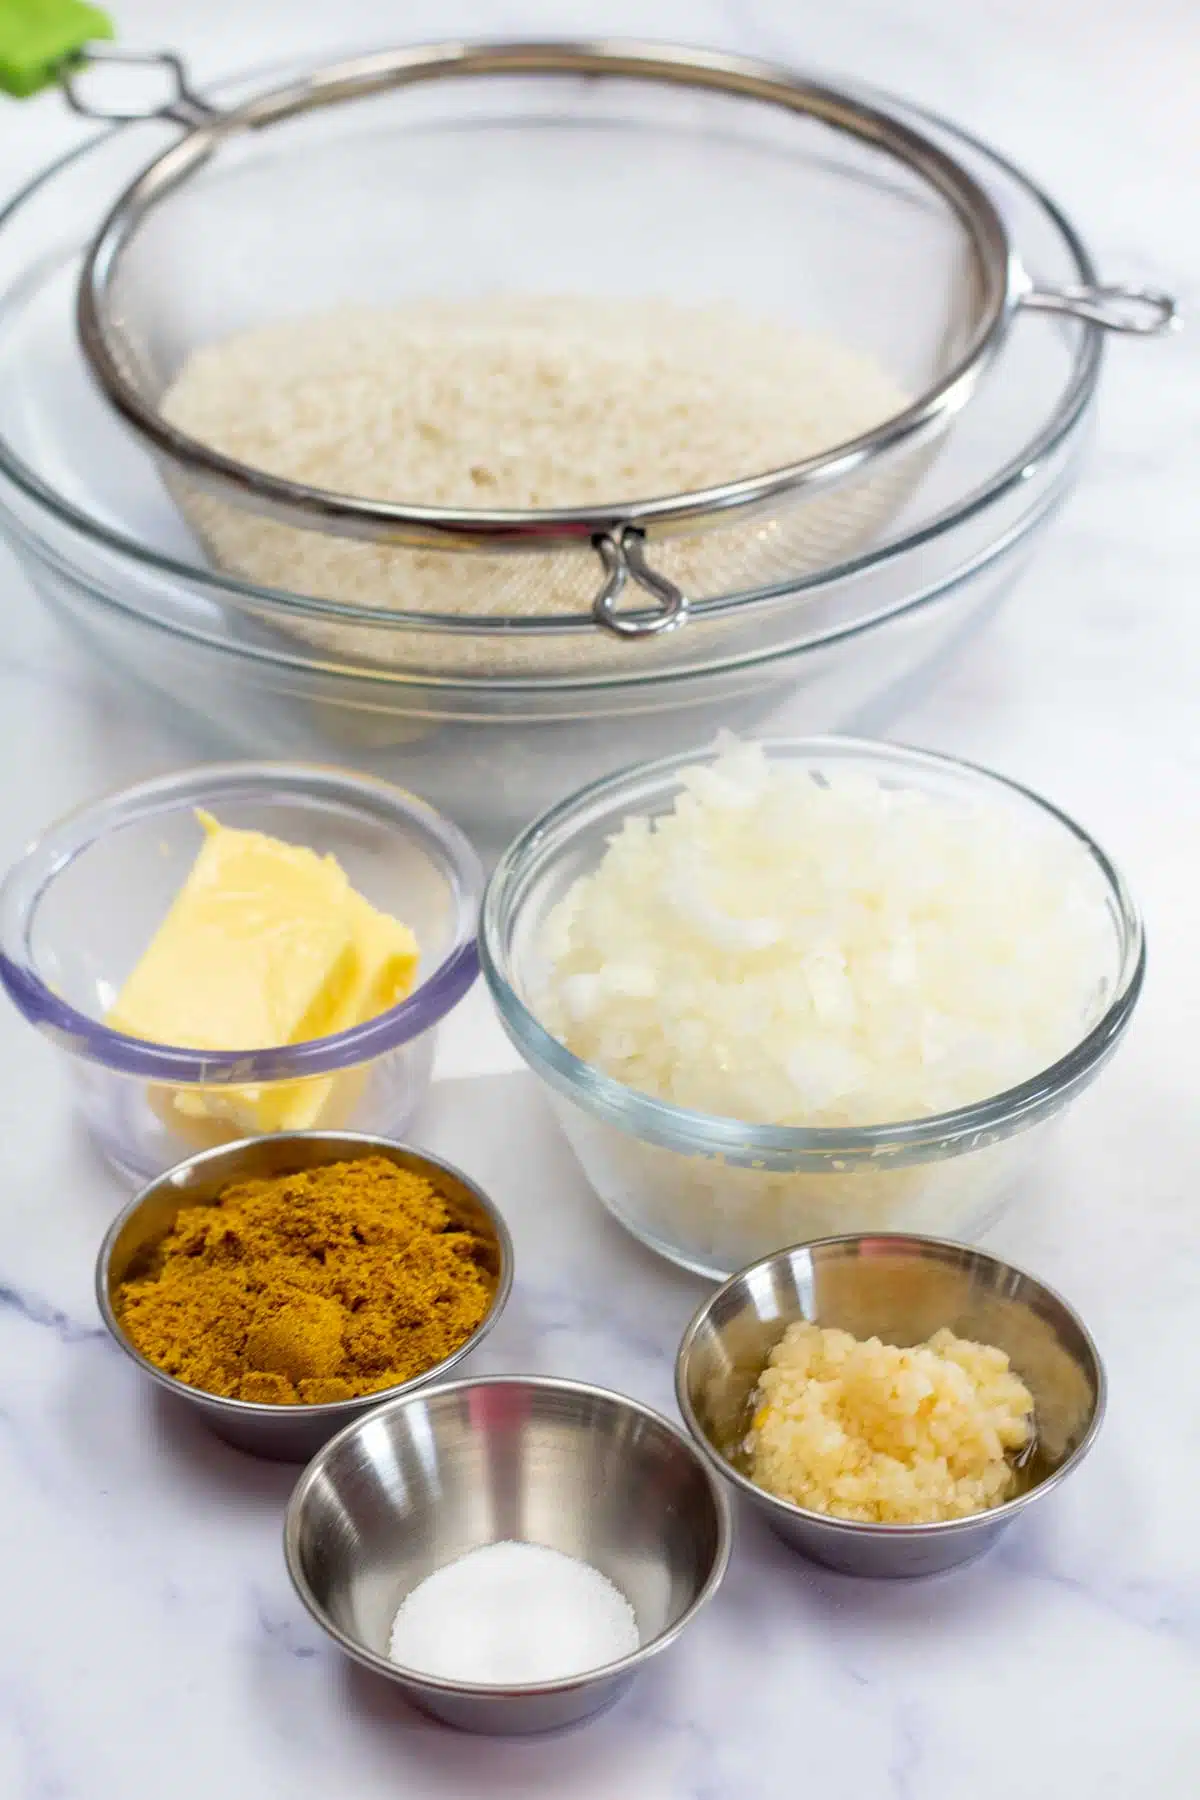 Tall image of ingredients needed for curry rice.